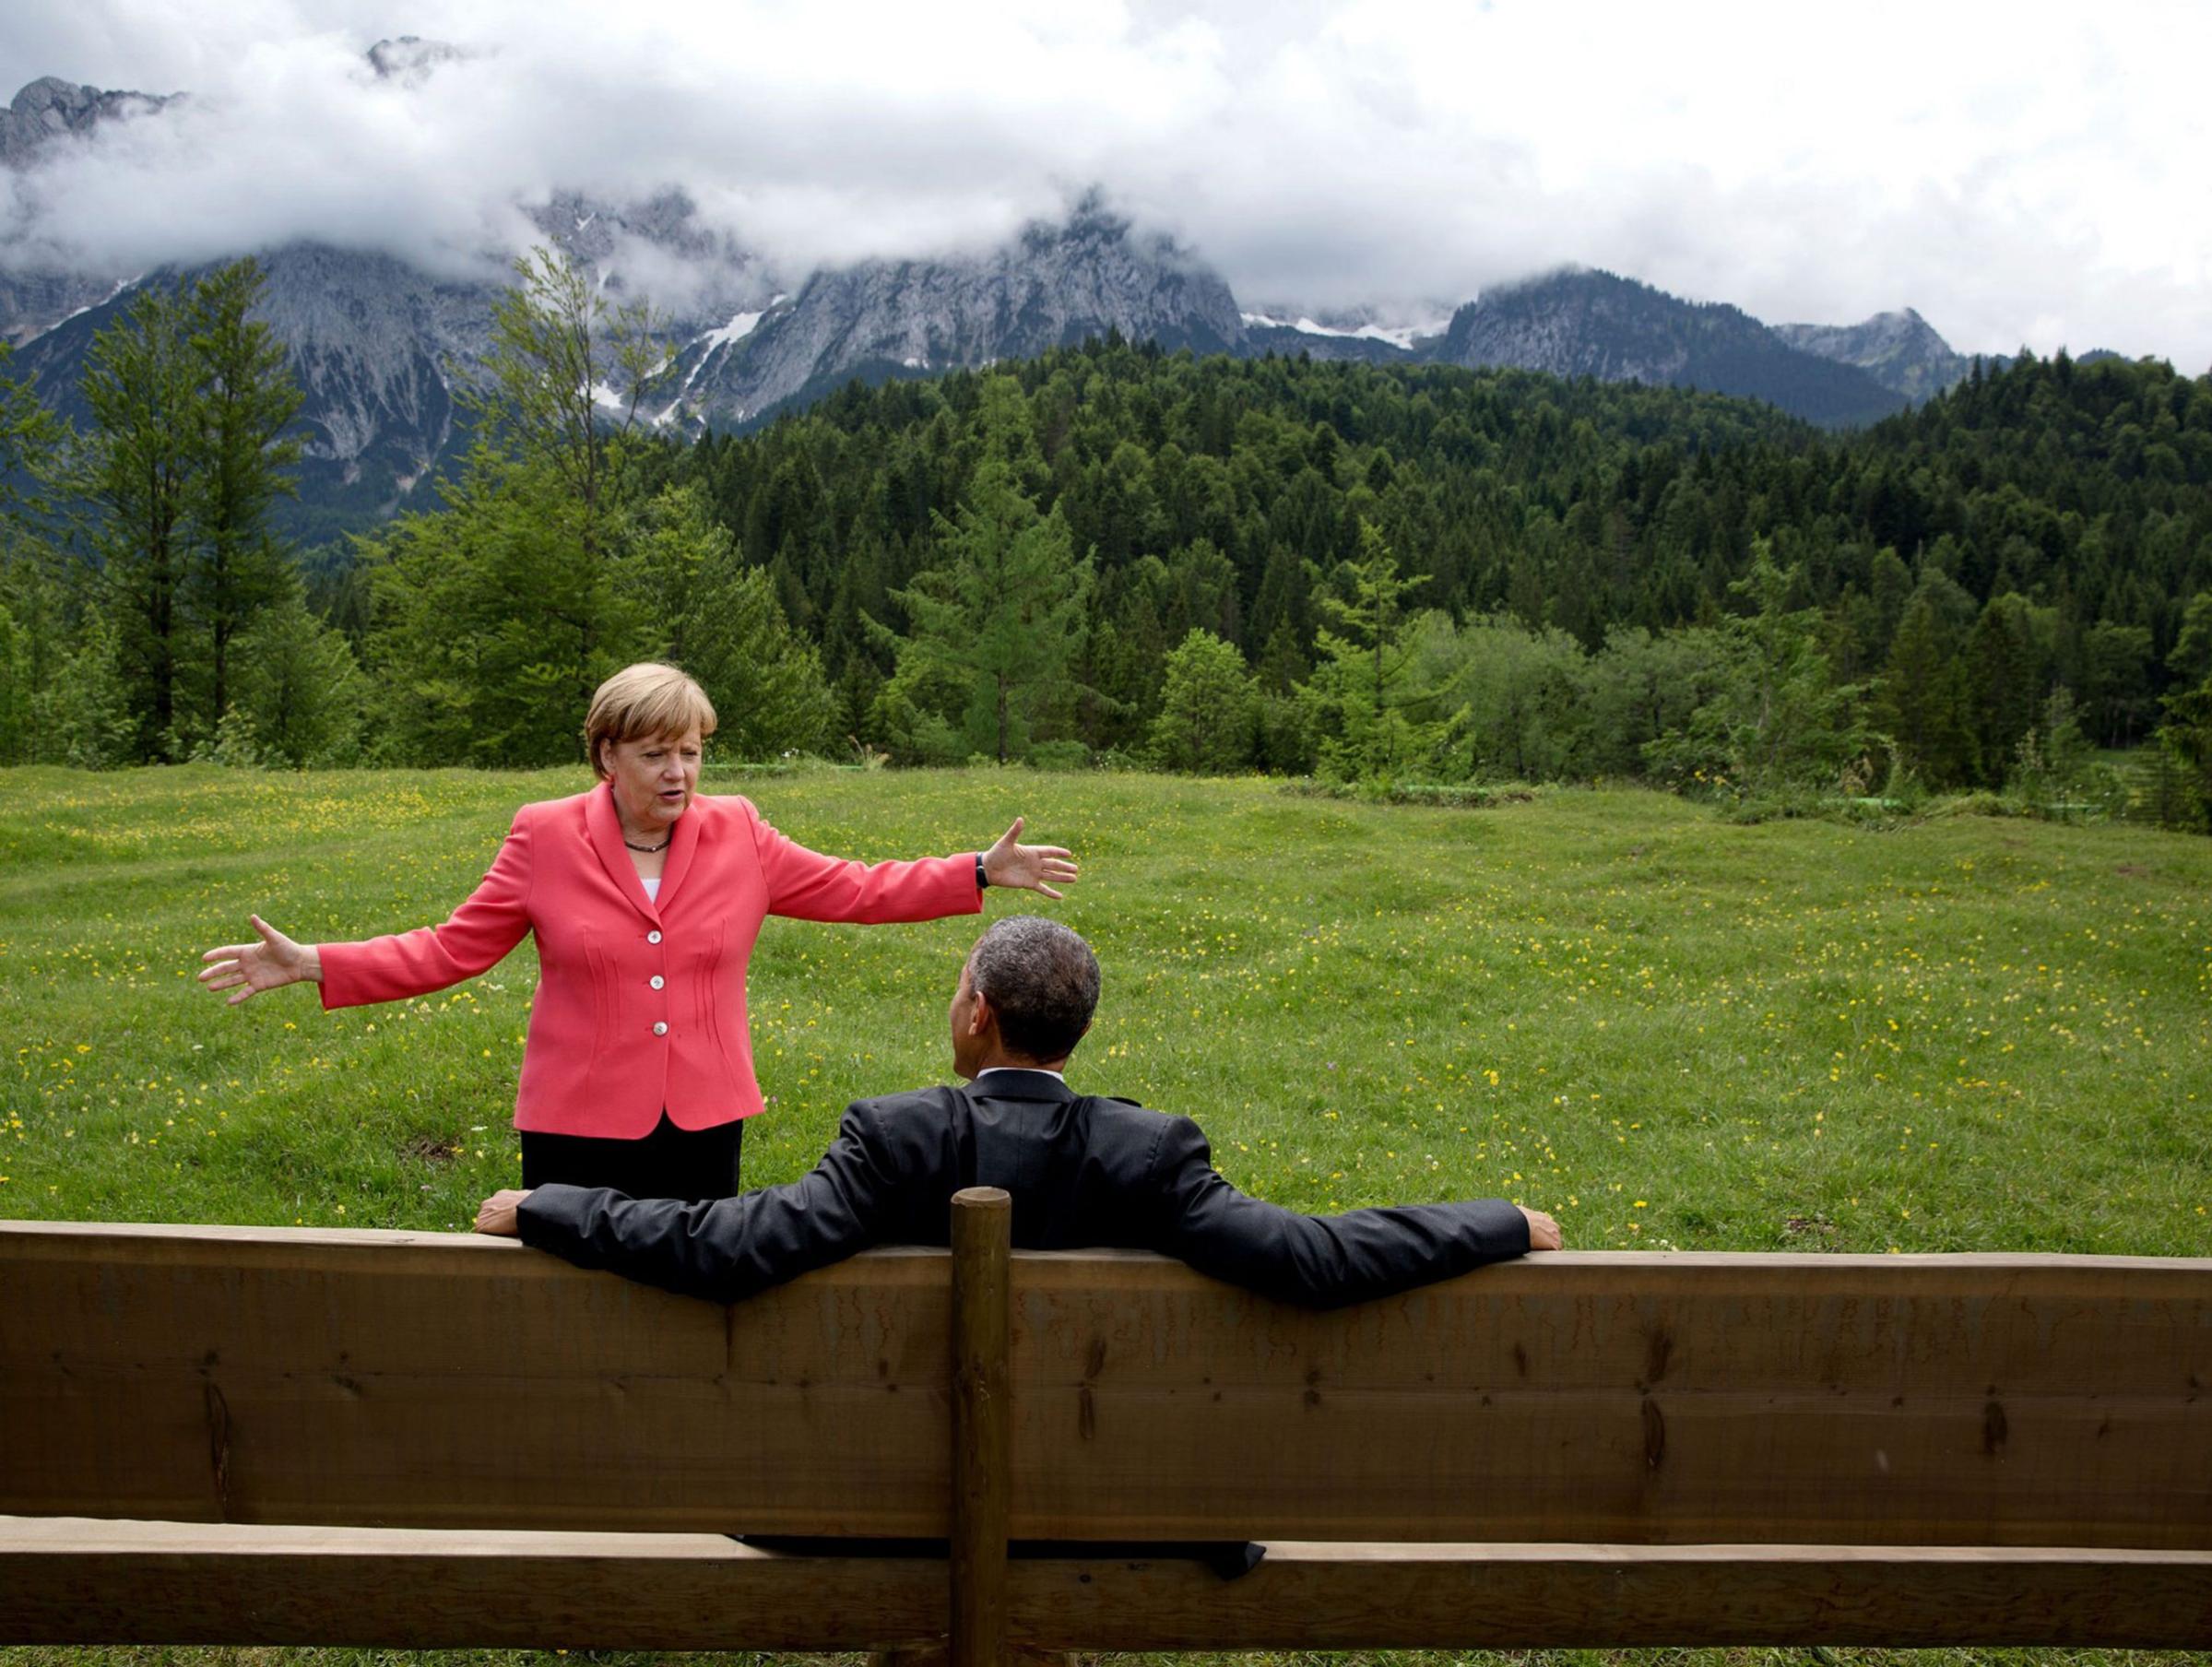 "We were at the G7 Summit in Krün, Germany. Chancellor Angela Merkel asked the leaders and outreach guests to make their way to a bench for a group photograph. The President happened to sit down first, followed closely by the Chancellor. I only had time to make a couple of frames before the background was cluttered with other people," June 8, 2015.